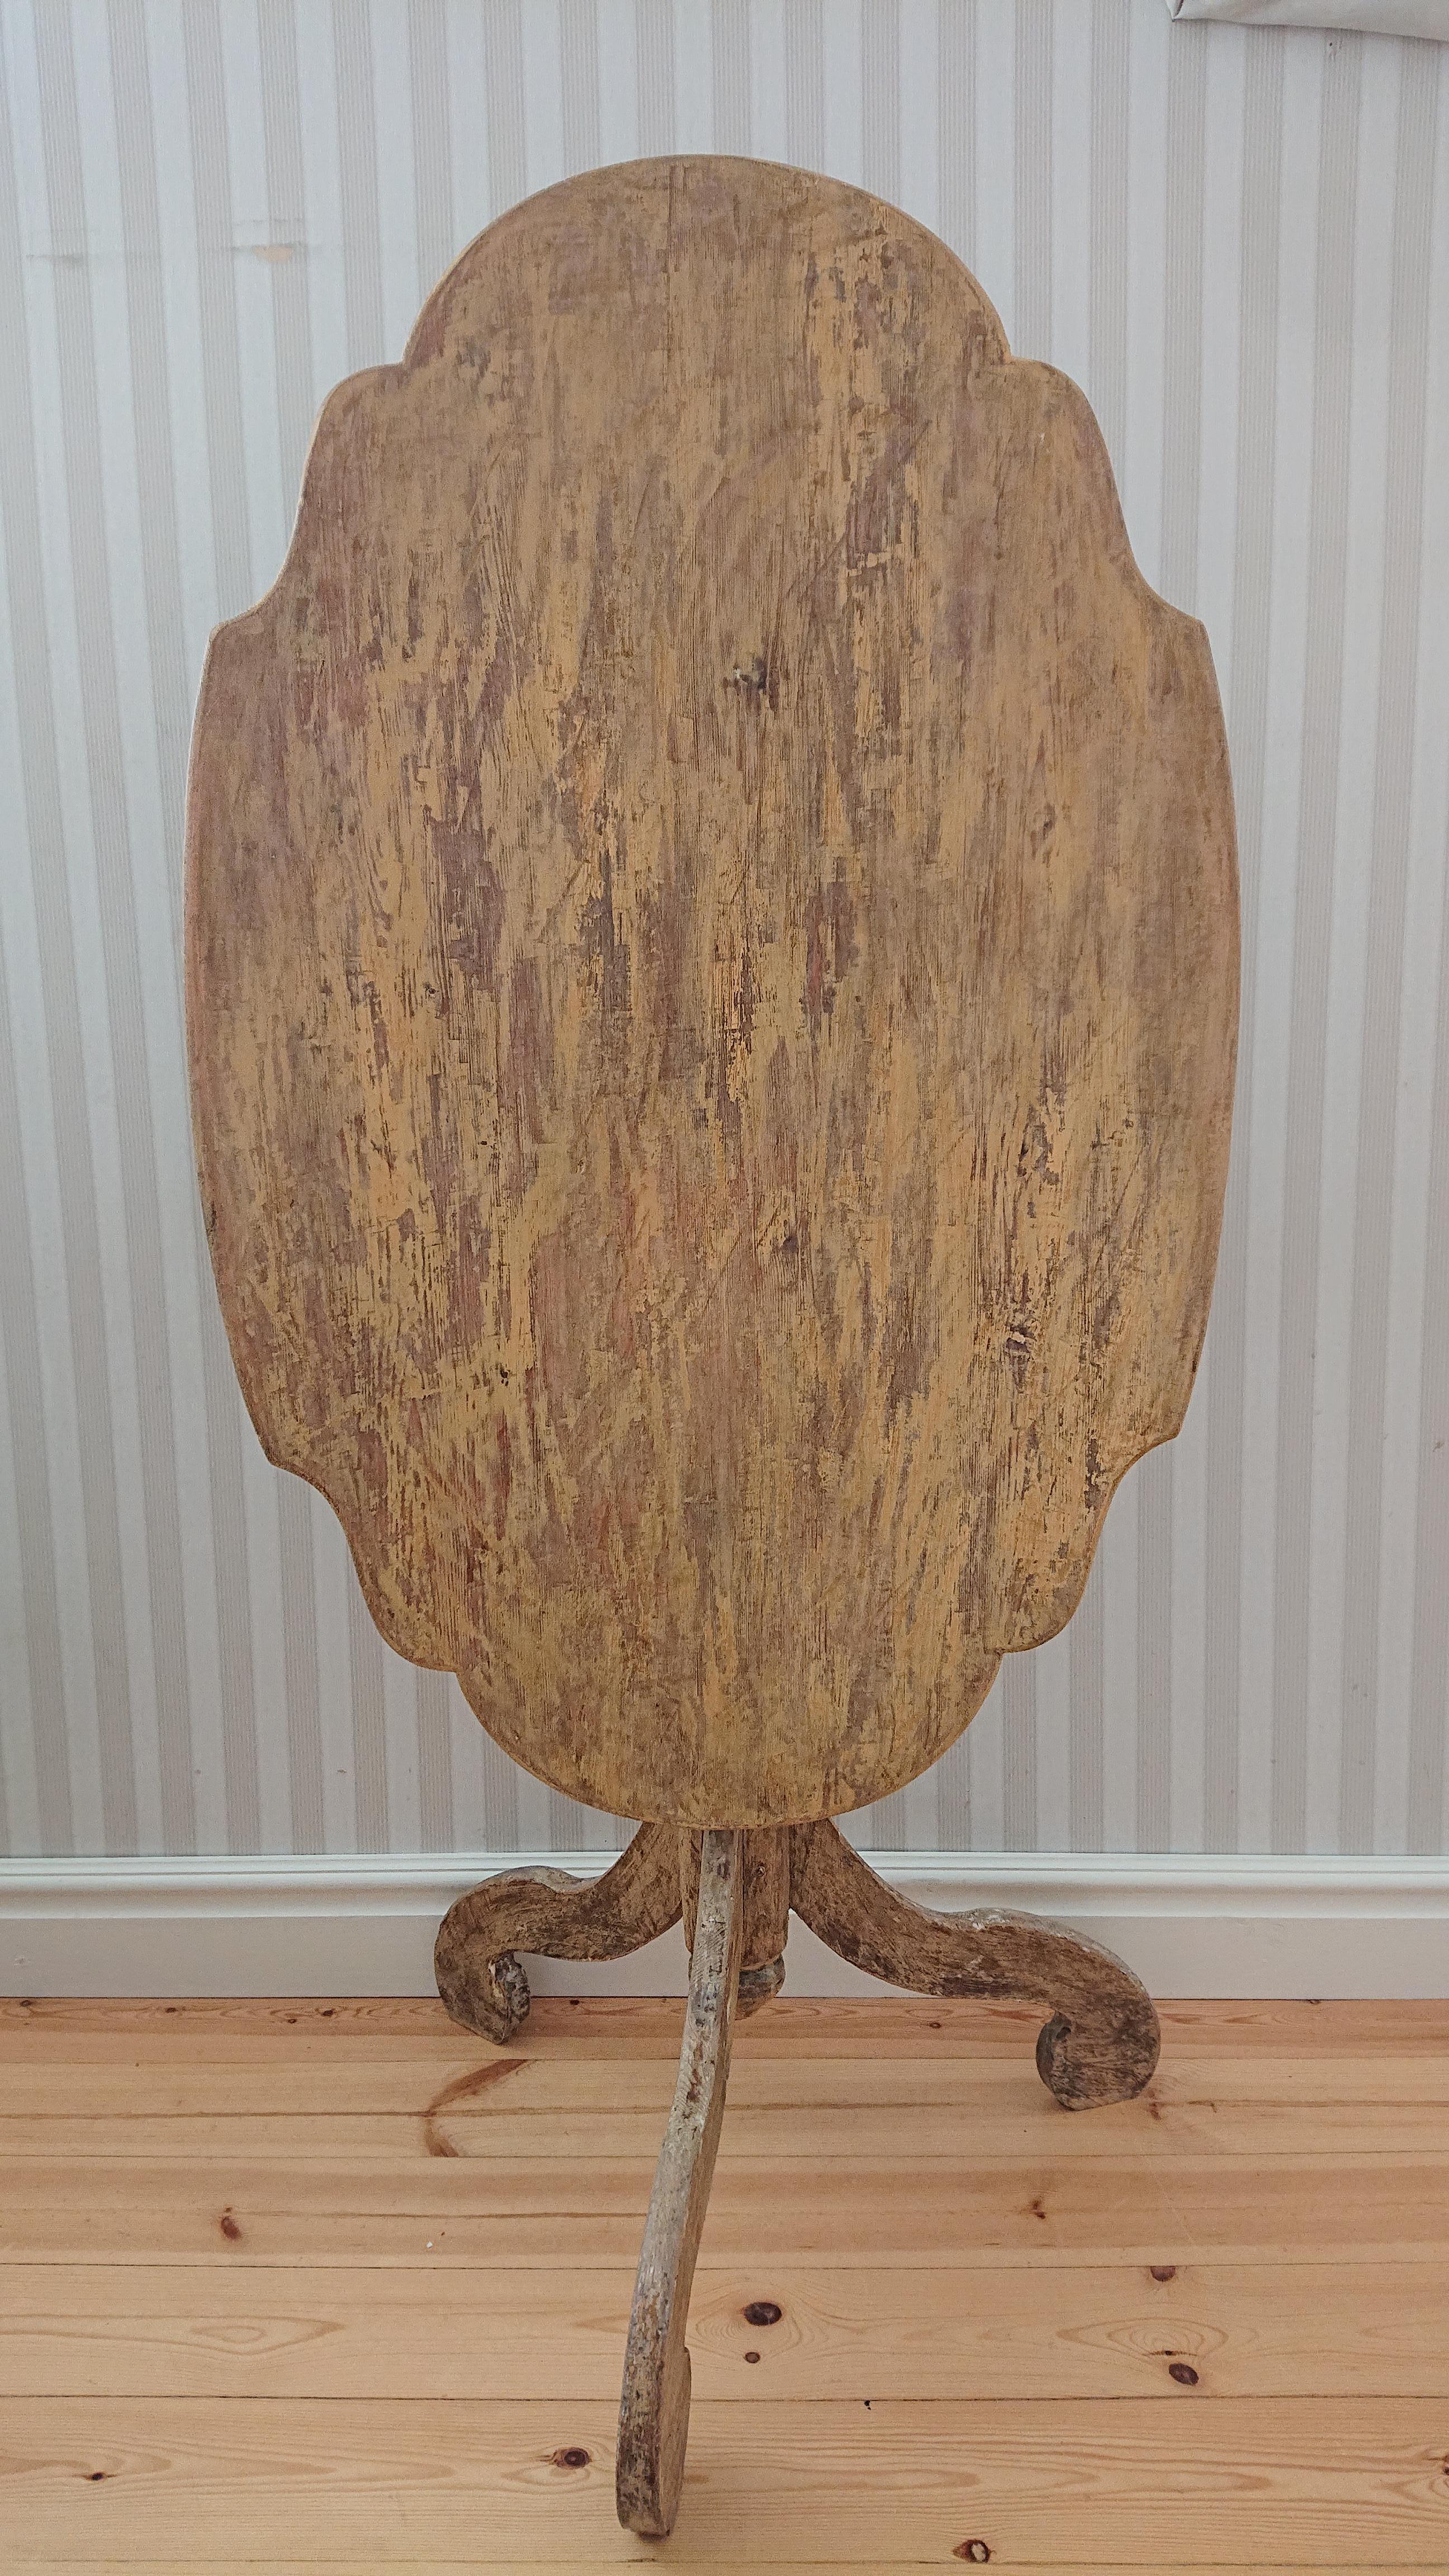 A stunning mid 18th century Rococo tilt top table from Råneå Norrbotten ,north of Sweden . Wonderful shaped top and elegant tripod base. The table has been scraped by hand to original paint and features a superb time worn patina.
The table top has